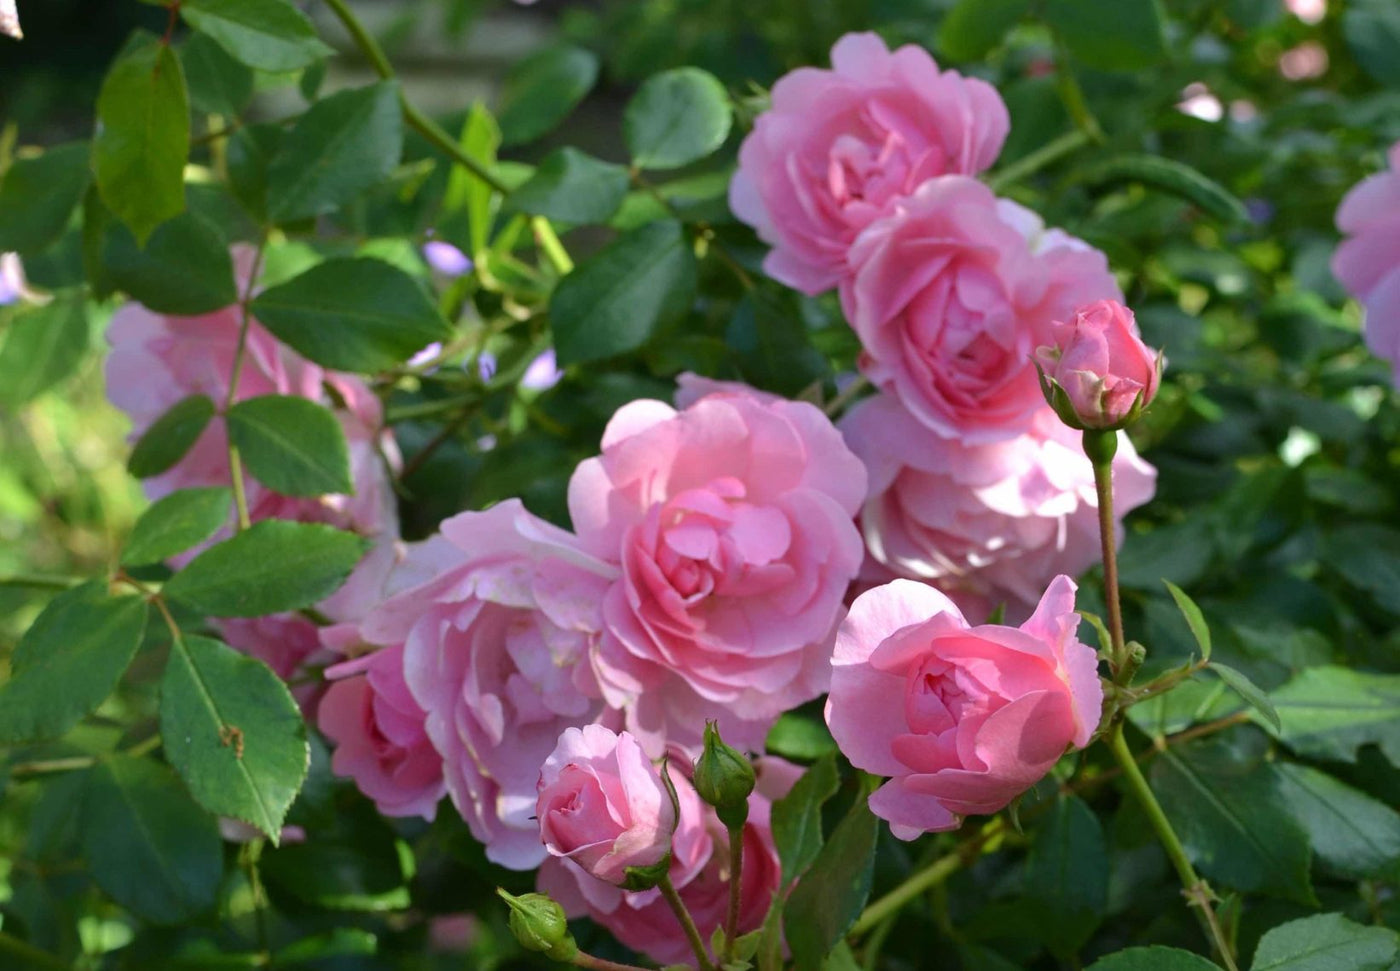 The Growbags’ 10 best roses